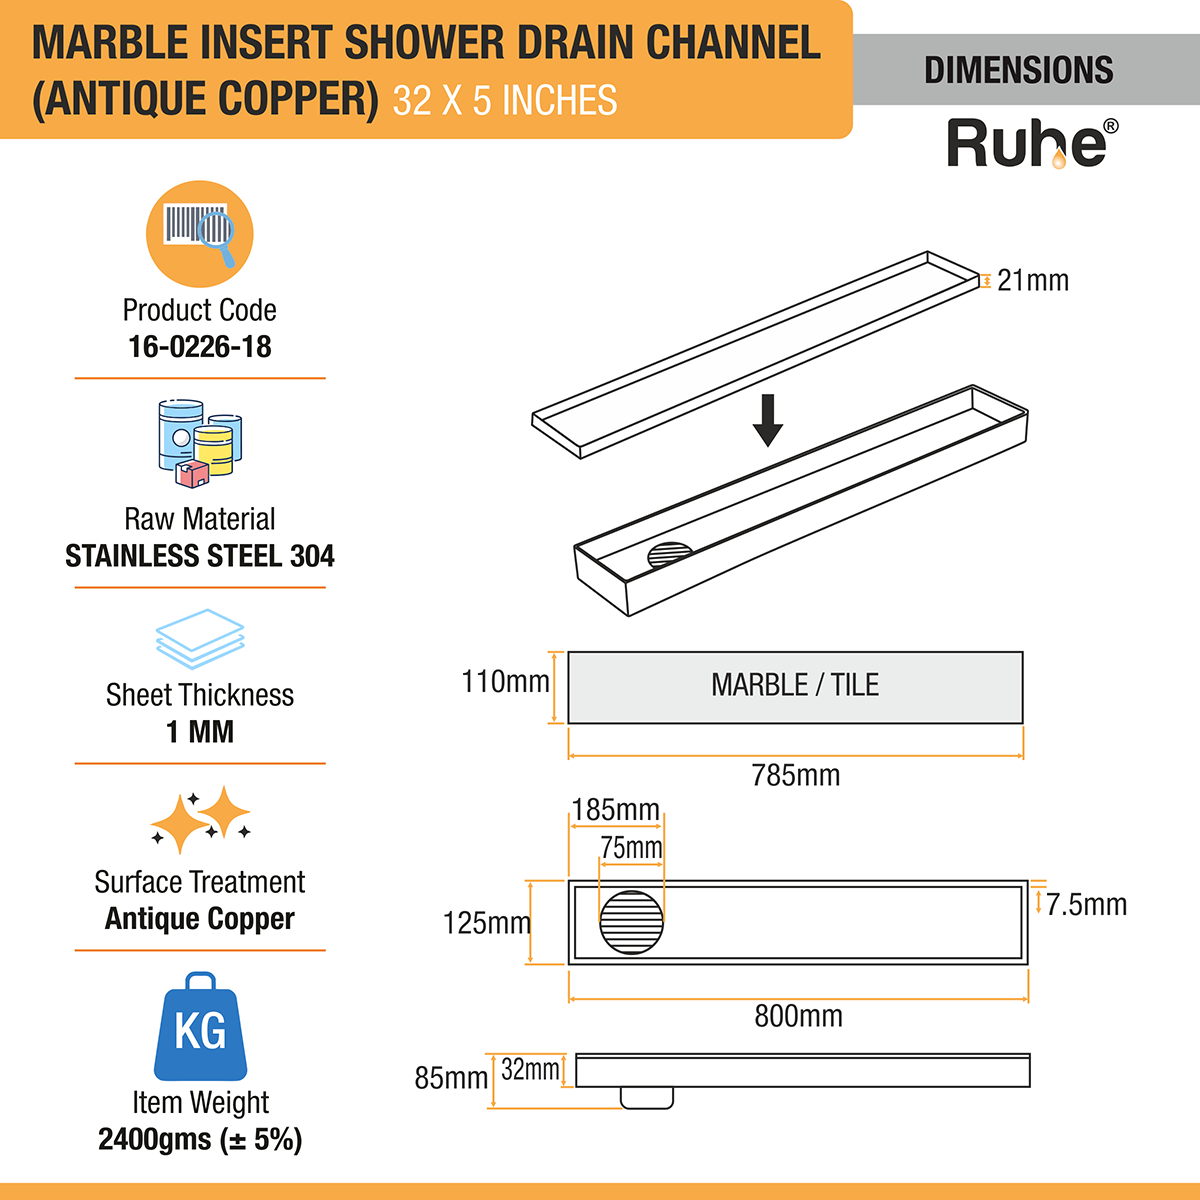 Marble Insert Shower Drain Channel (32 x 5 Inches) ROSE GOLD PVD Coated dimensions and sizes